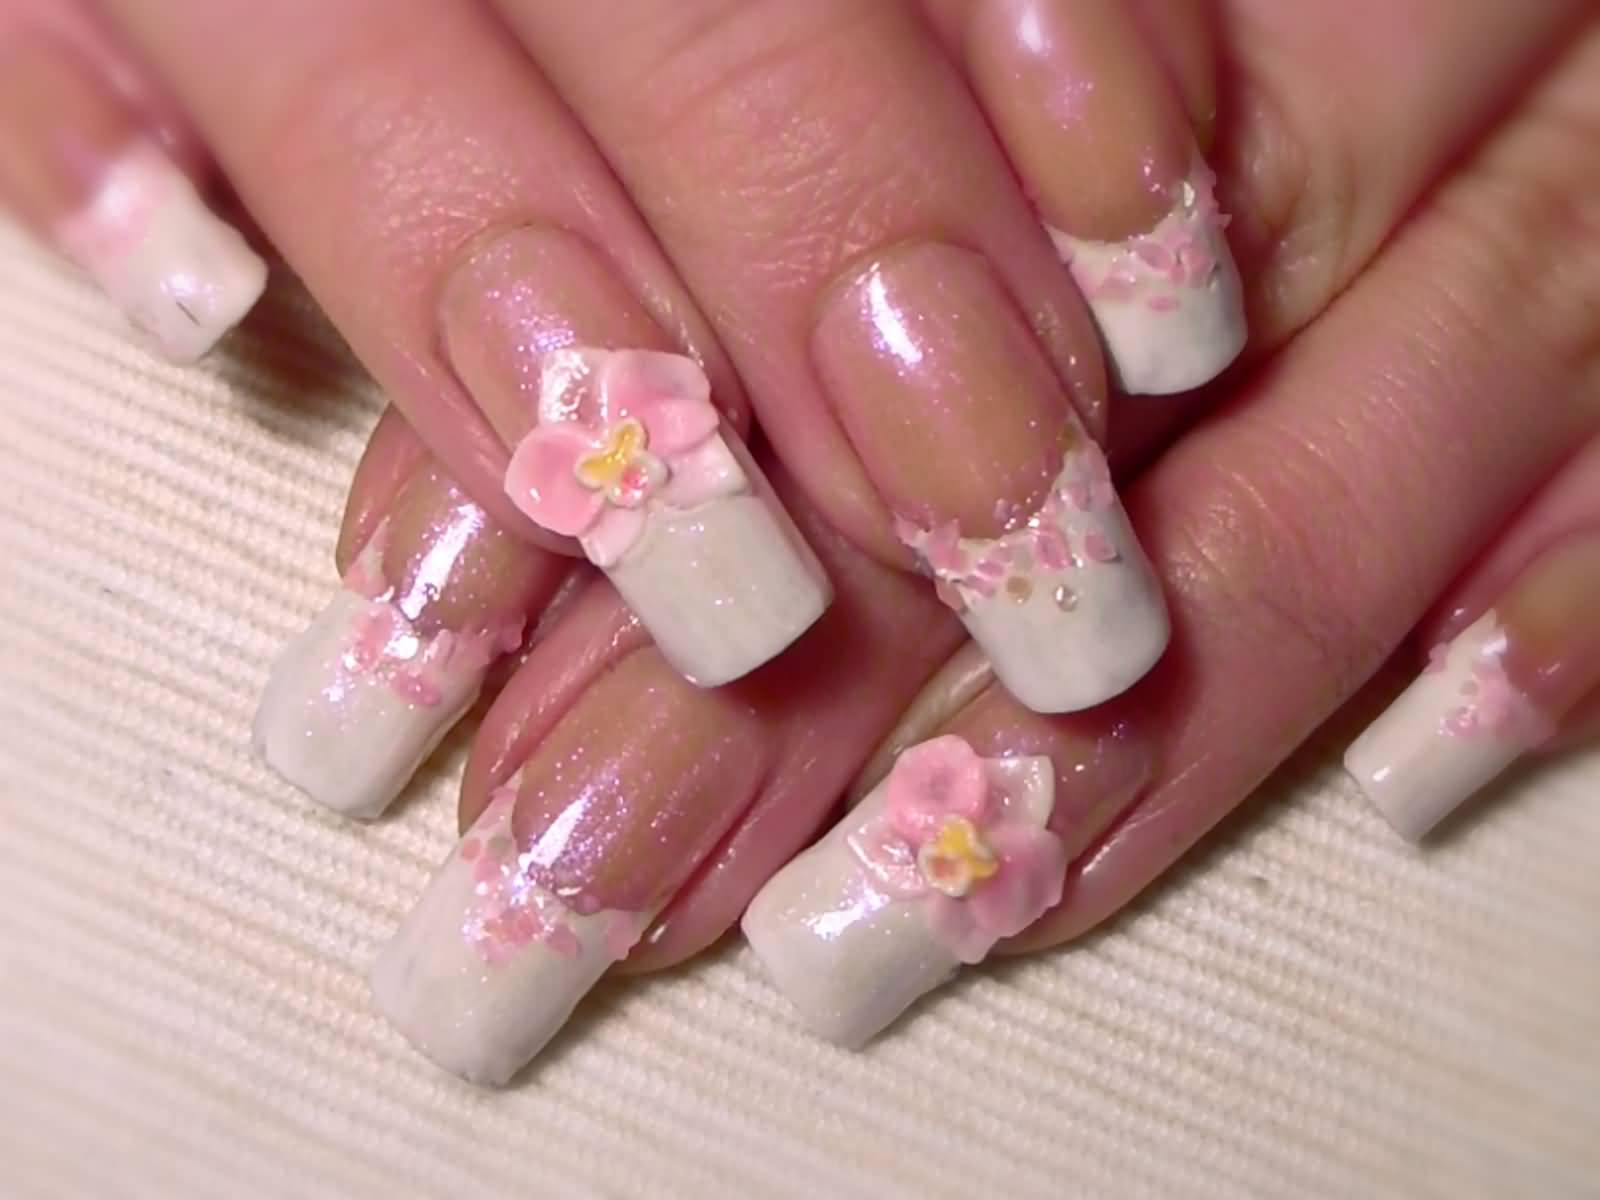 White Tip Nails With Pink 3D Flowers Nail Art